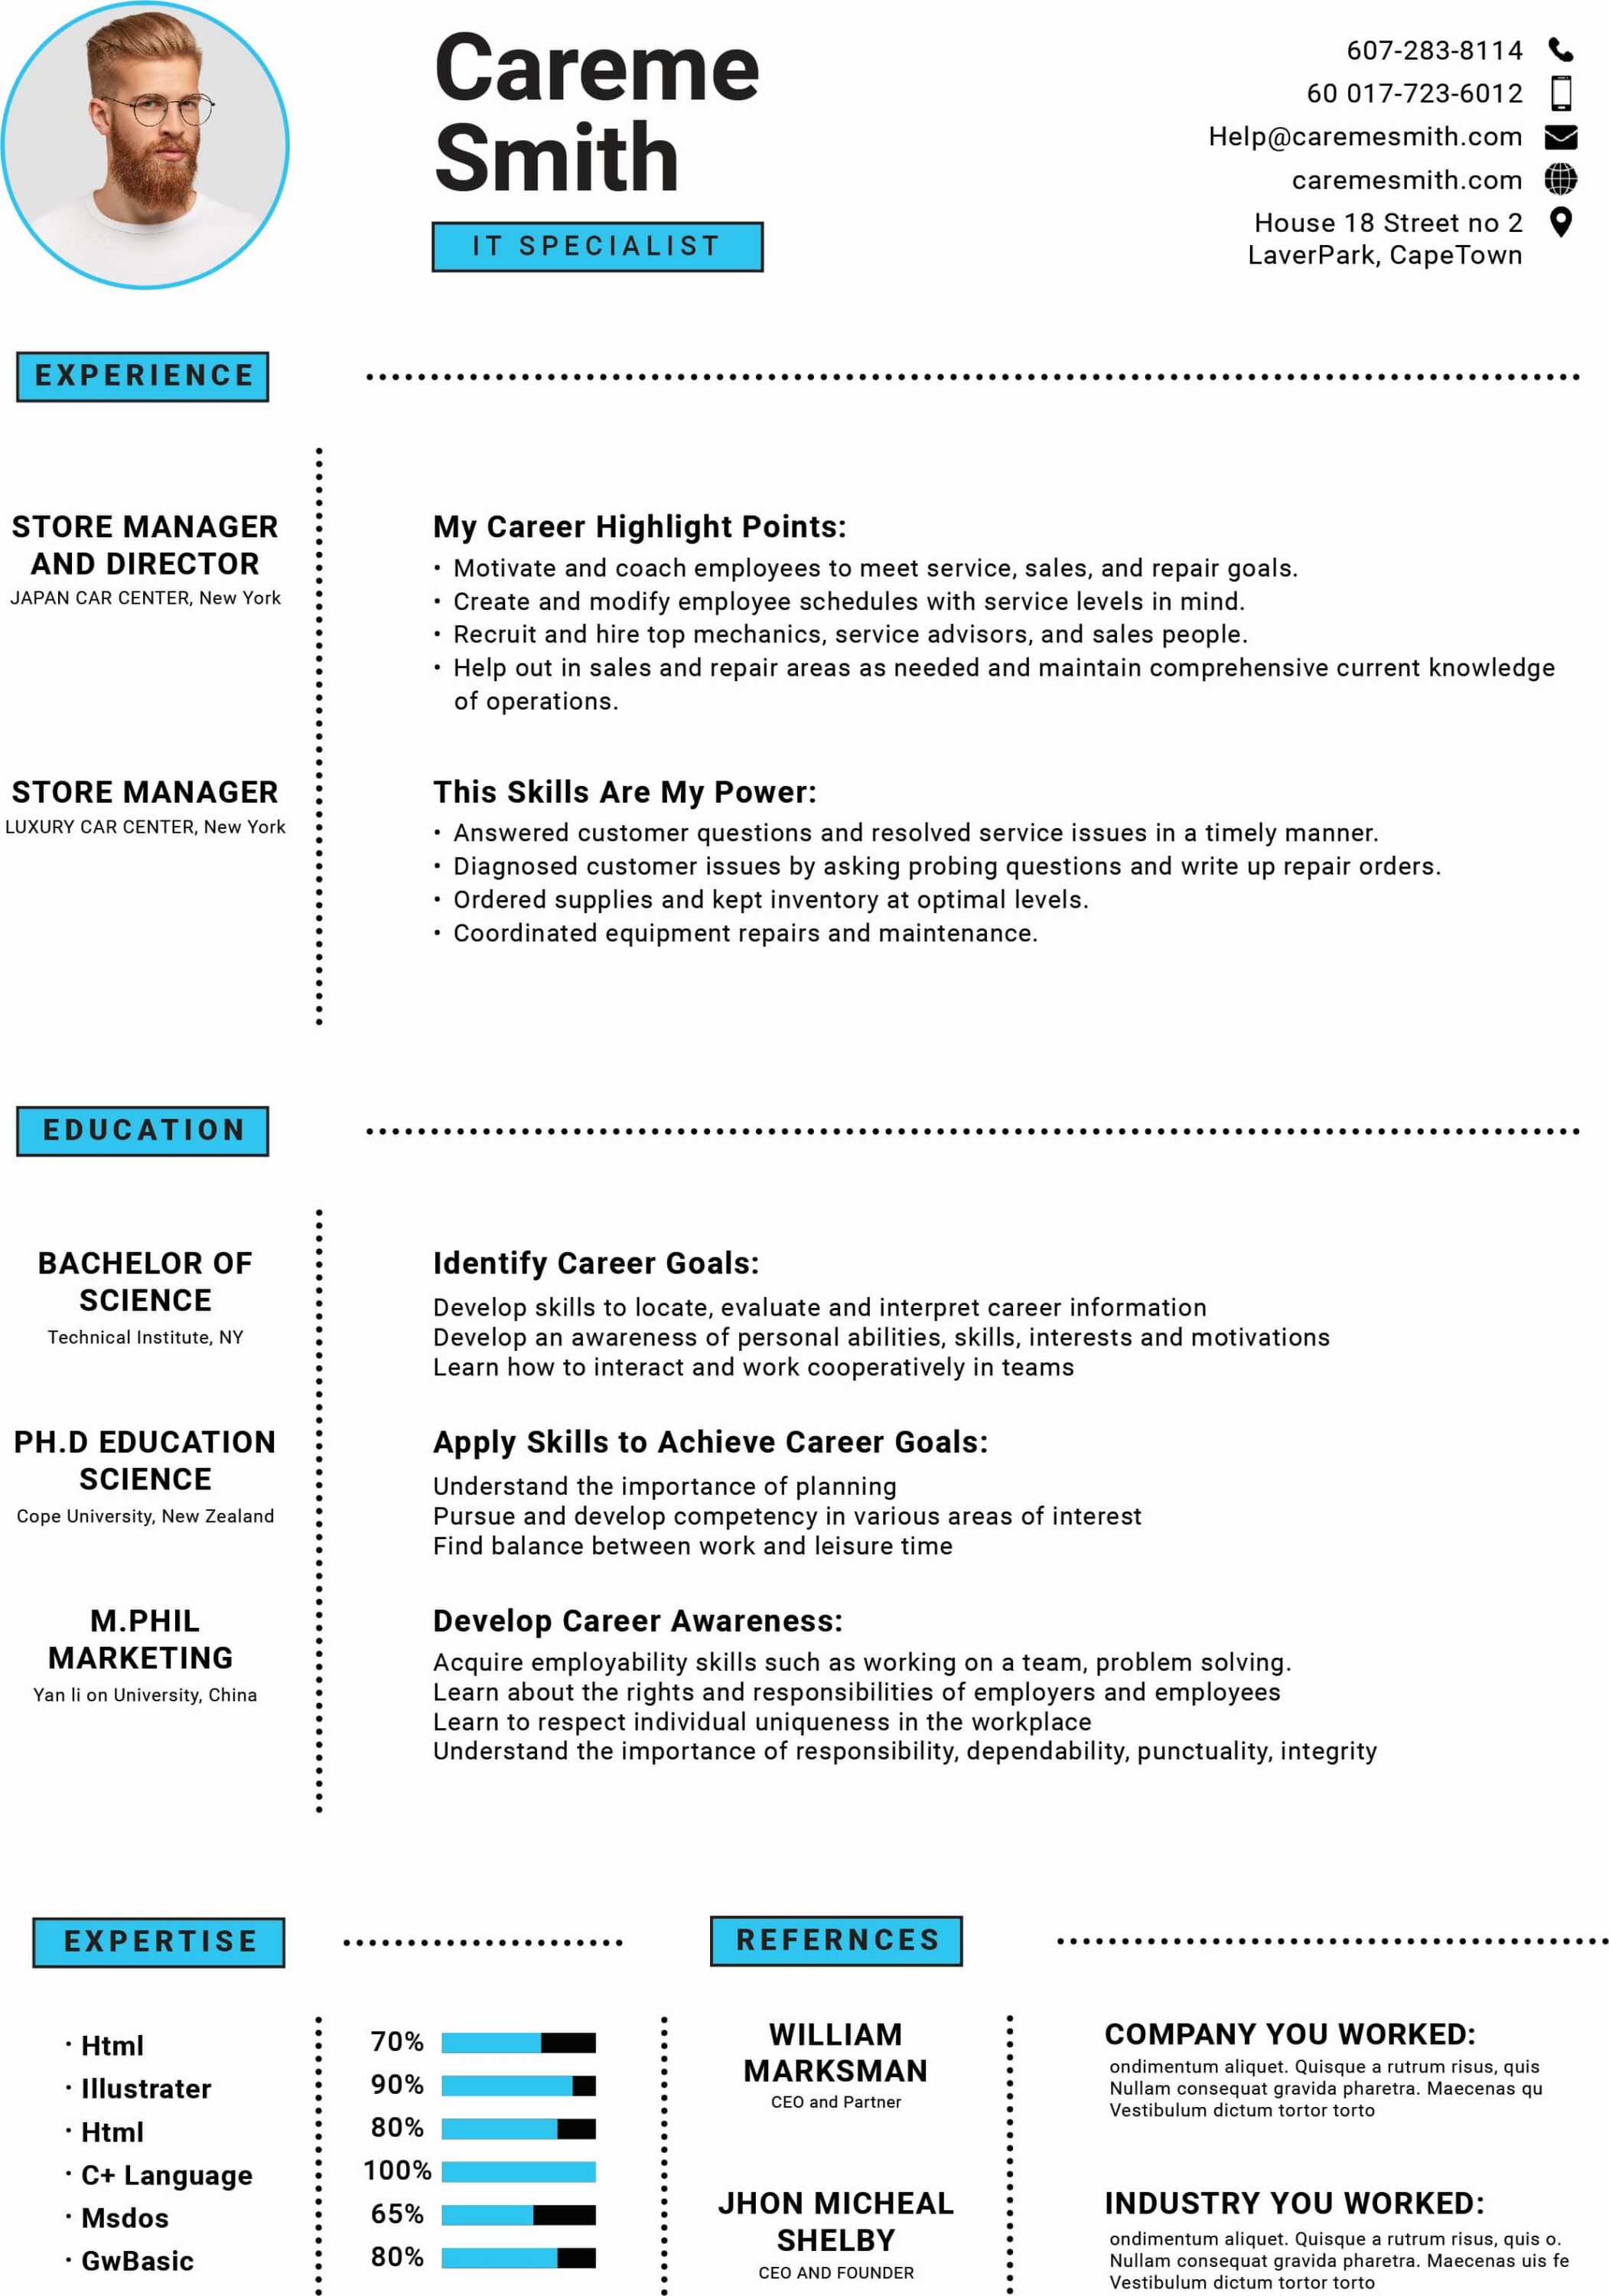 Professional resume with a blue background.